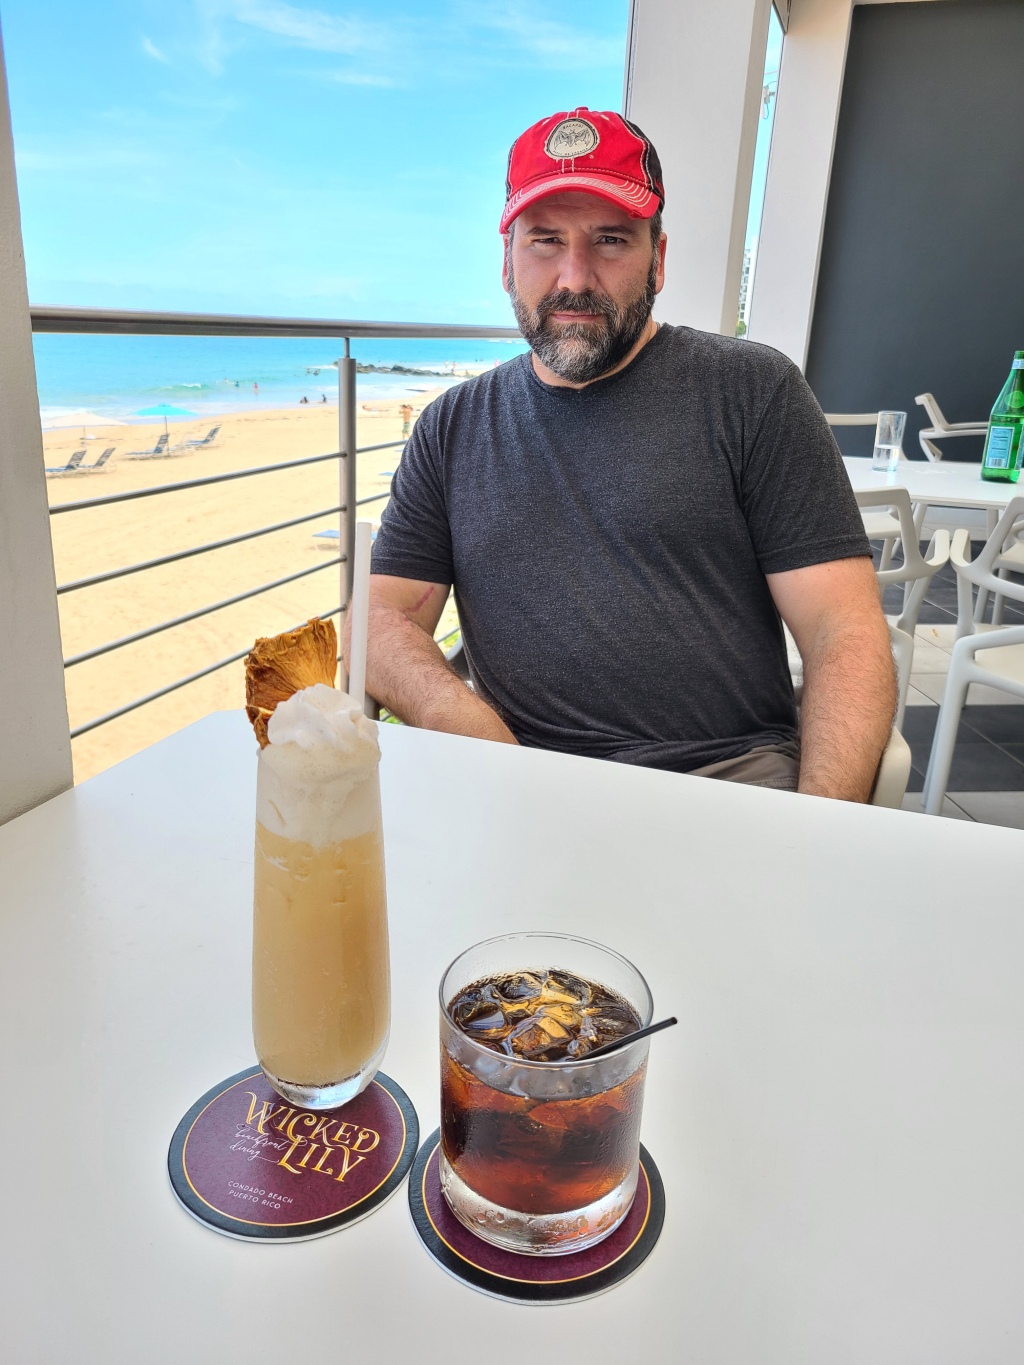 A drink and bite on the beach